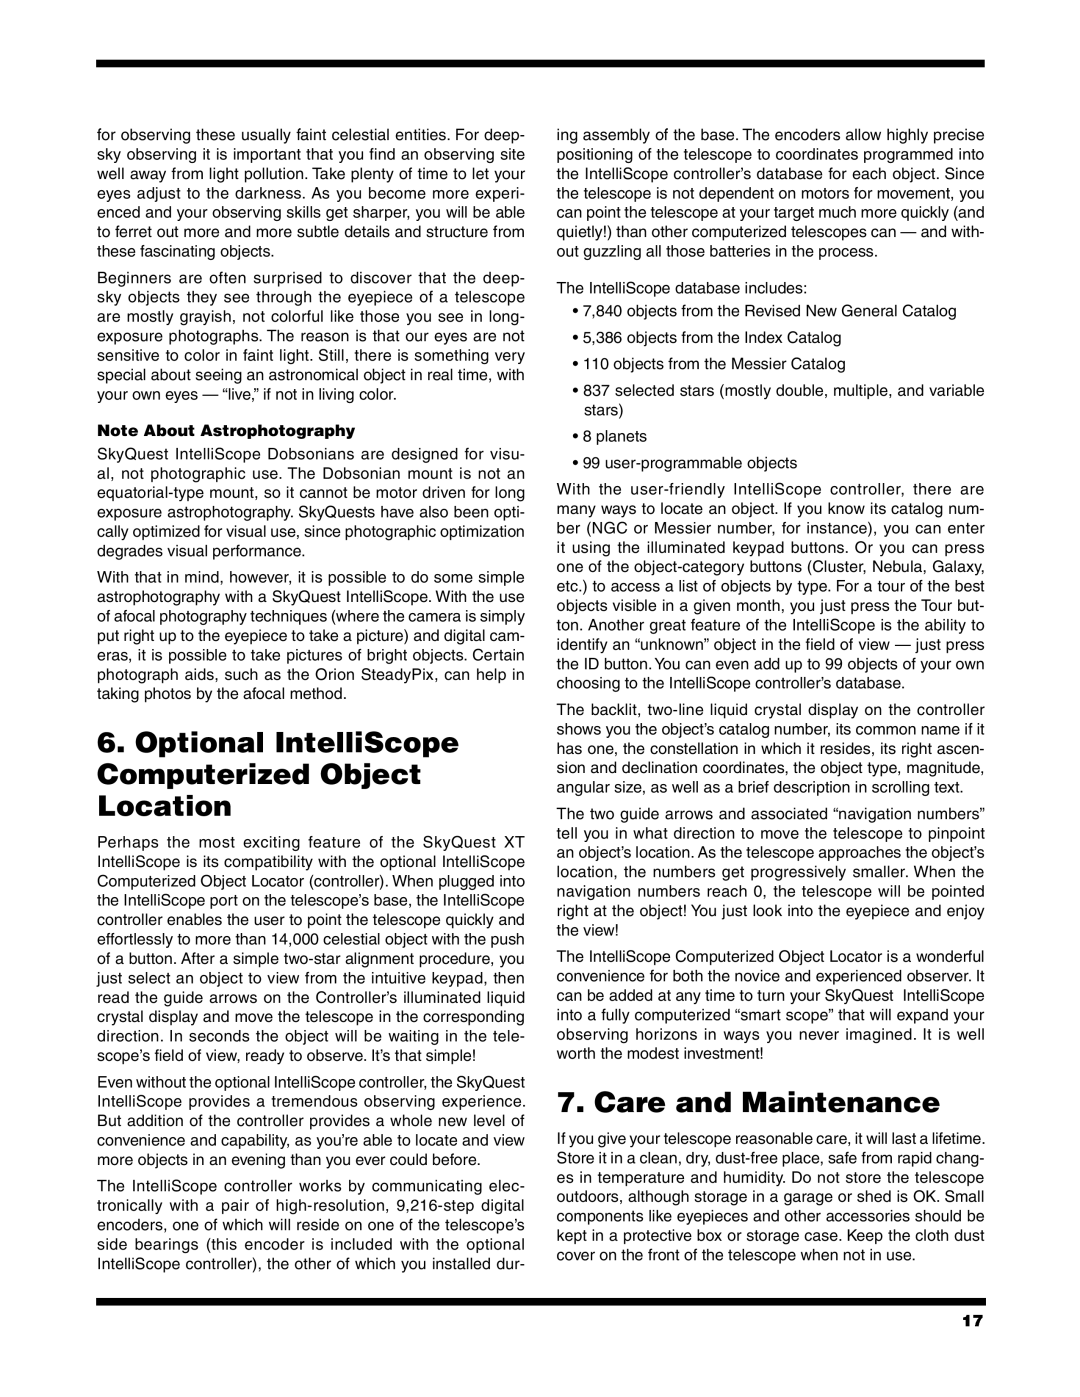 Orion XT10, XT6, XT8 instruction manual Care and Maintenance, Note About Astrophotography 